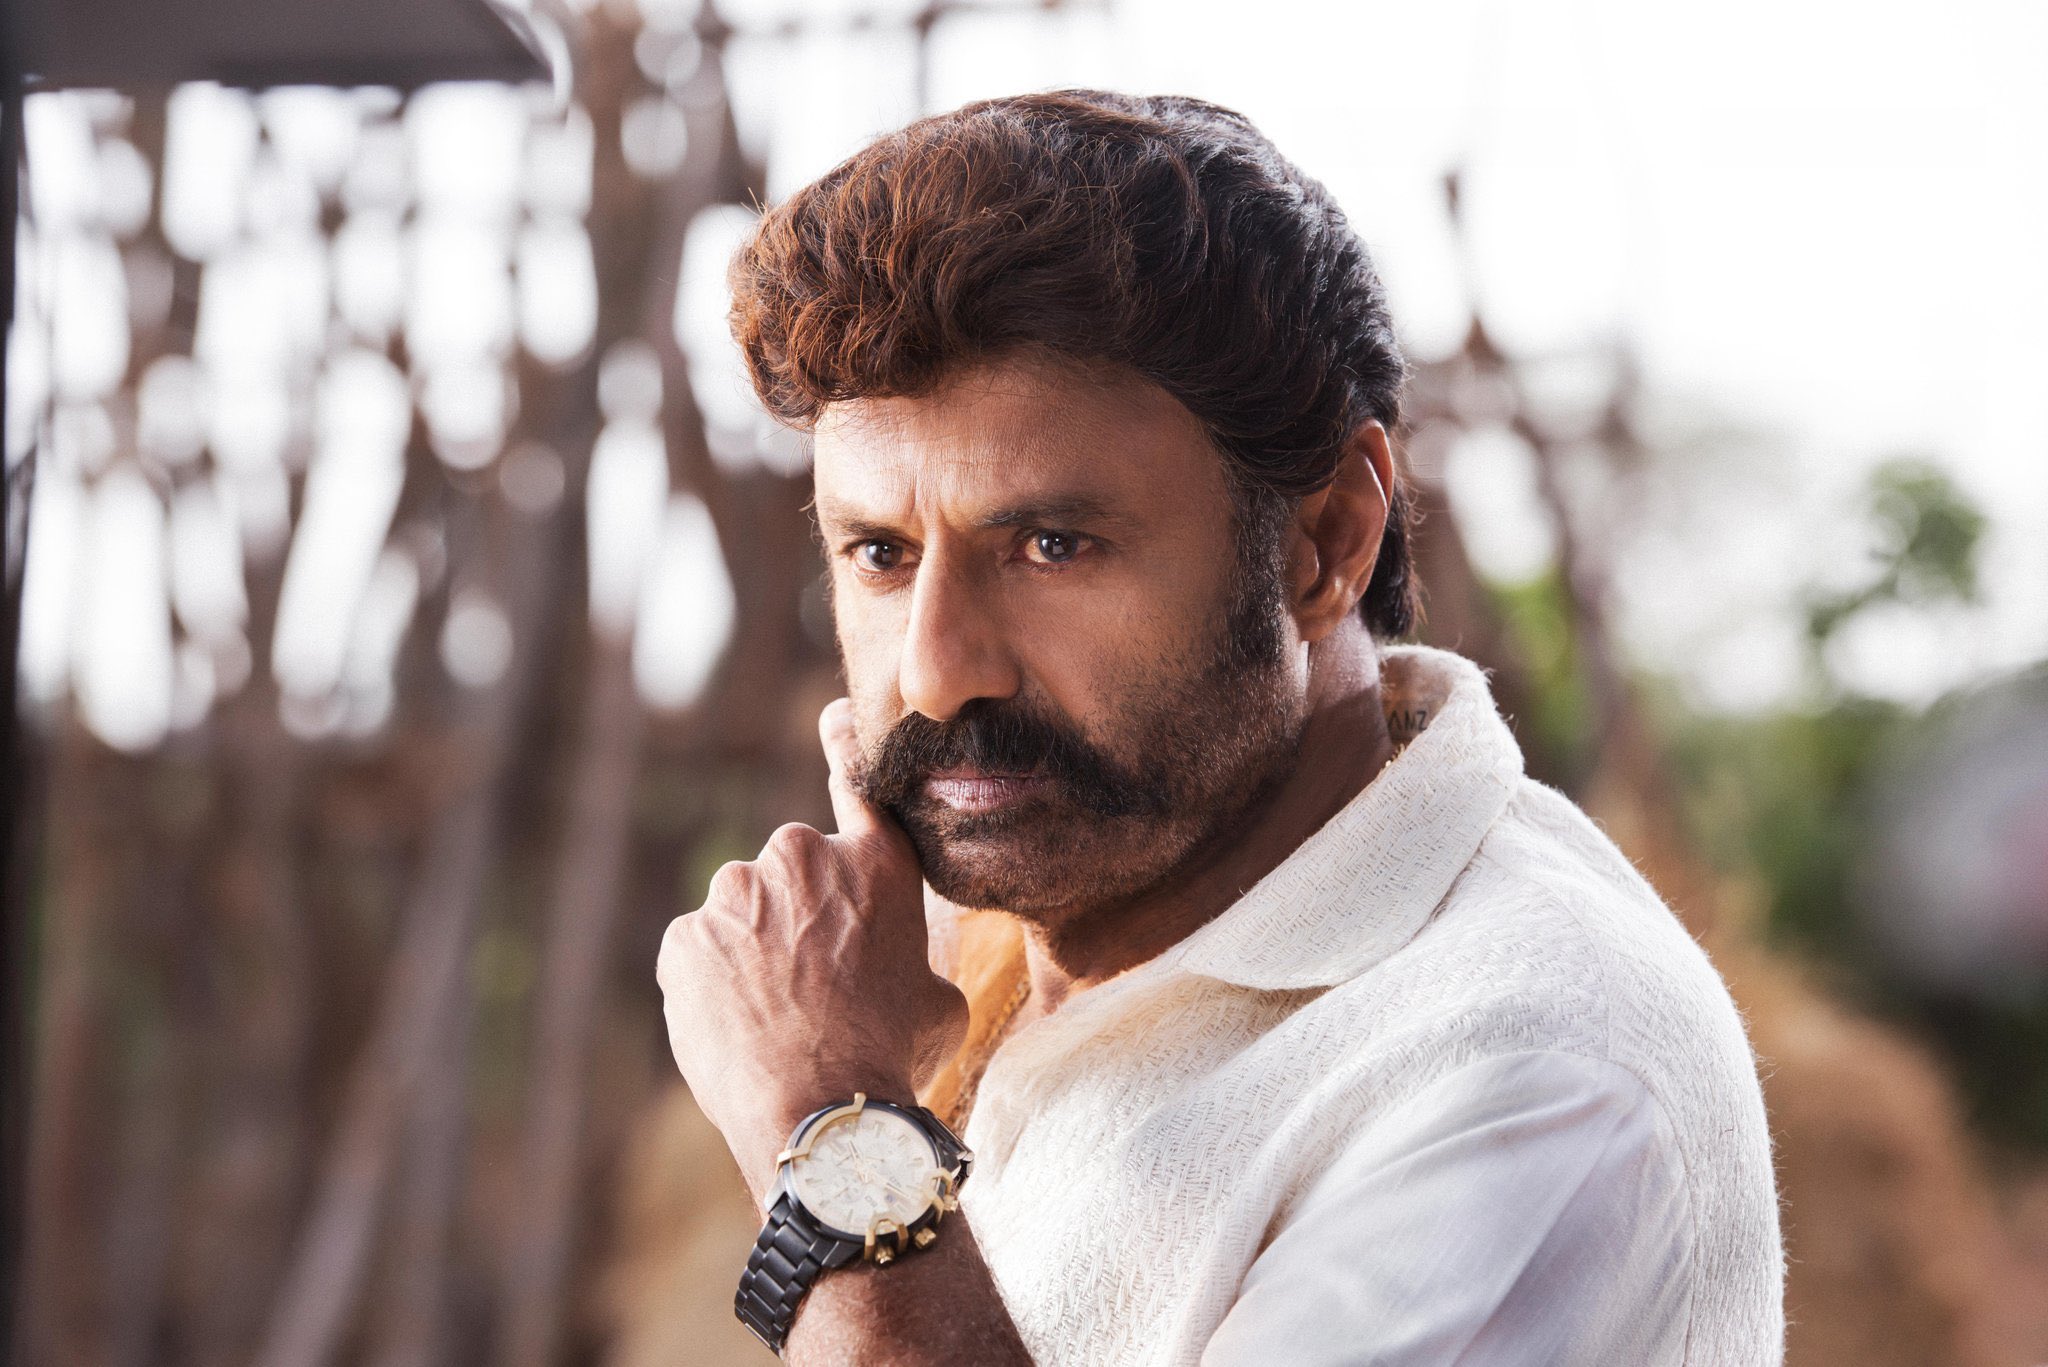 Balakrishna is the director who is bringing the powerful lady villain into the field